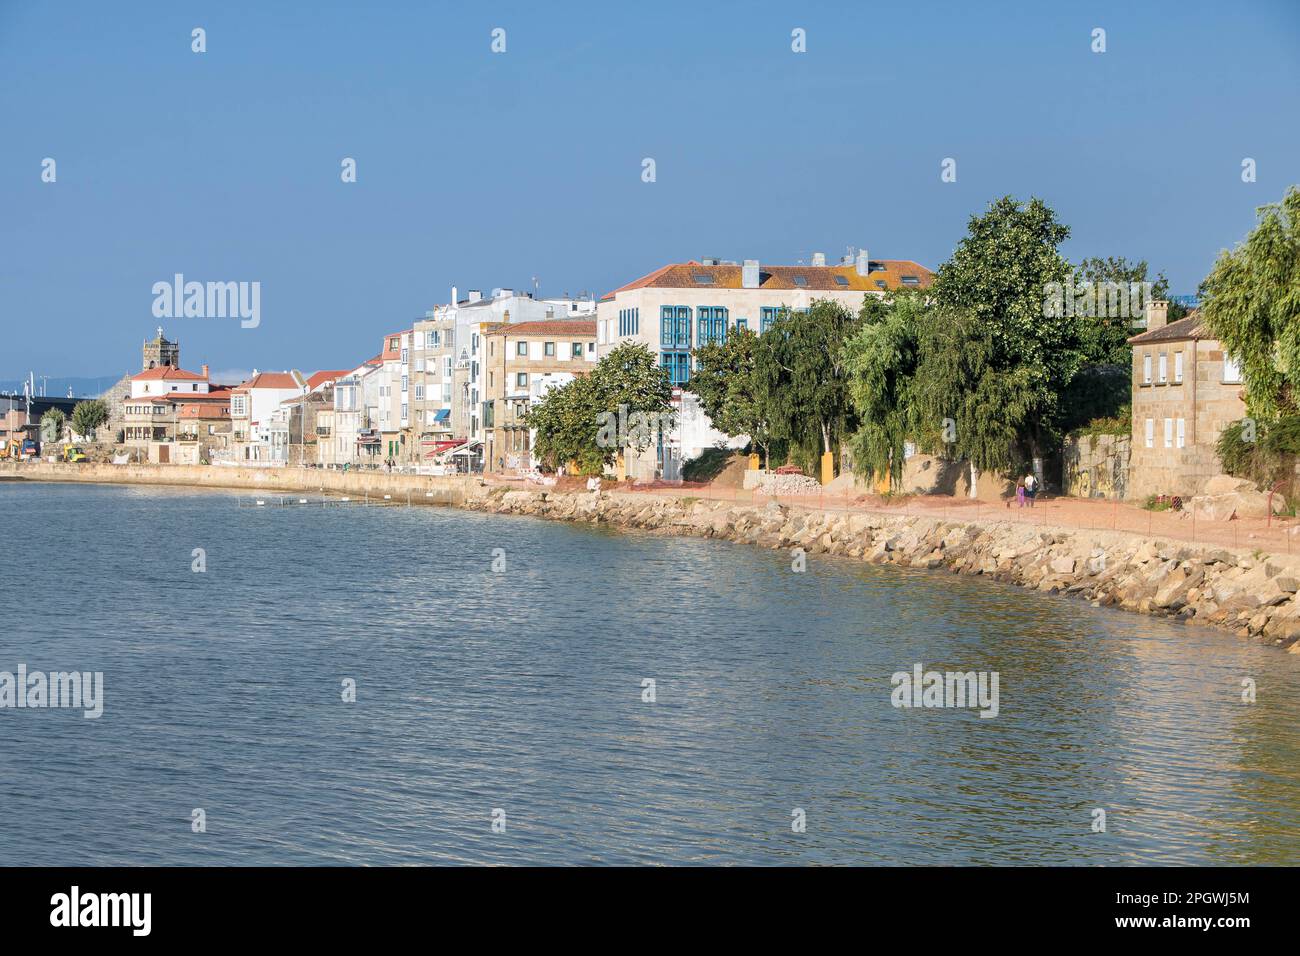 View of the village of Bouzas in Galicia, Spain Stock Photo